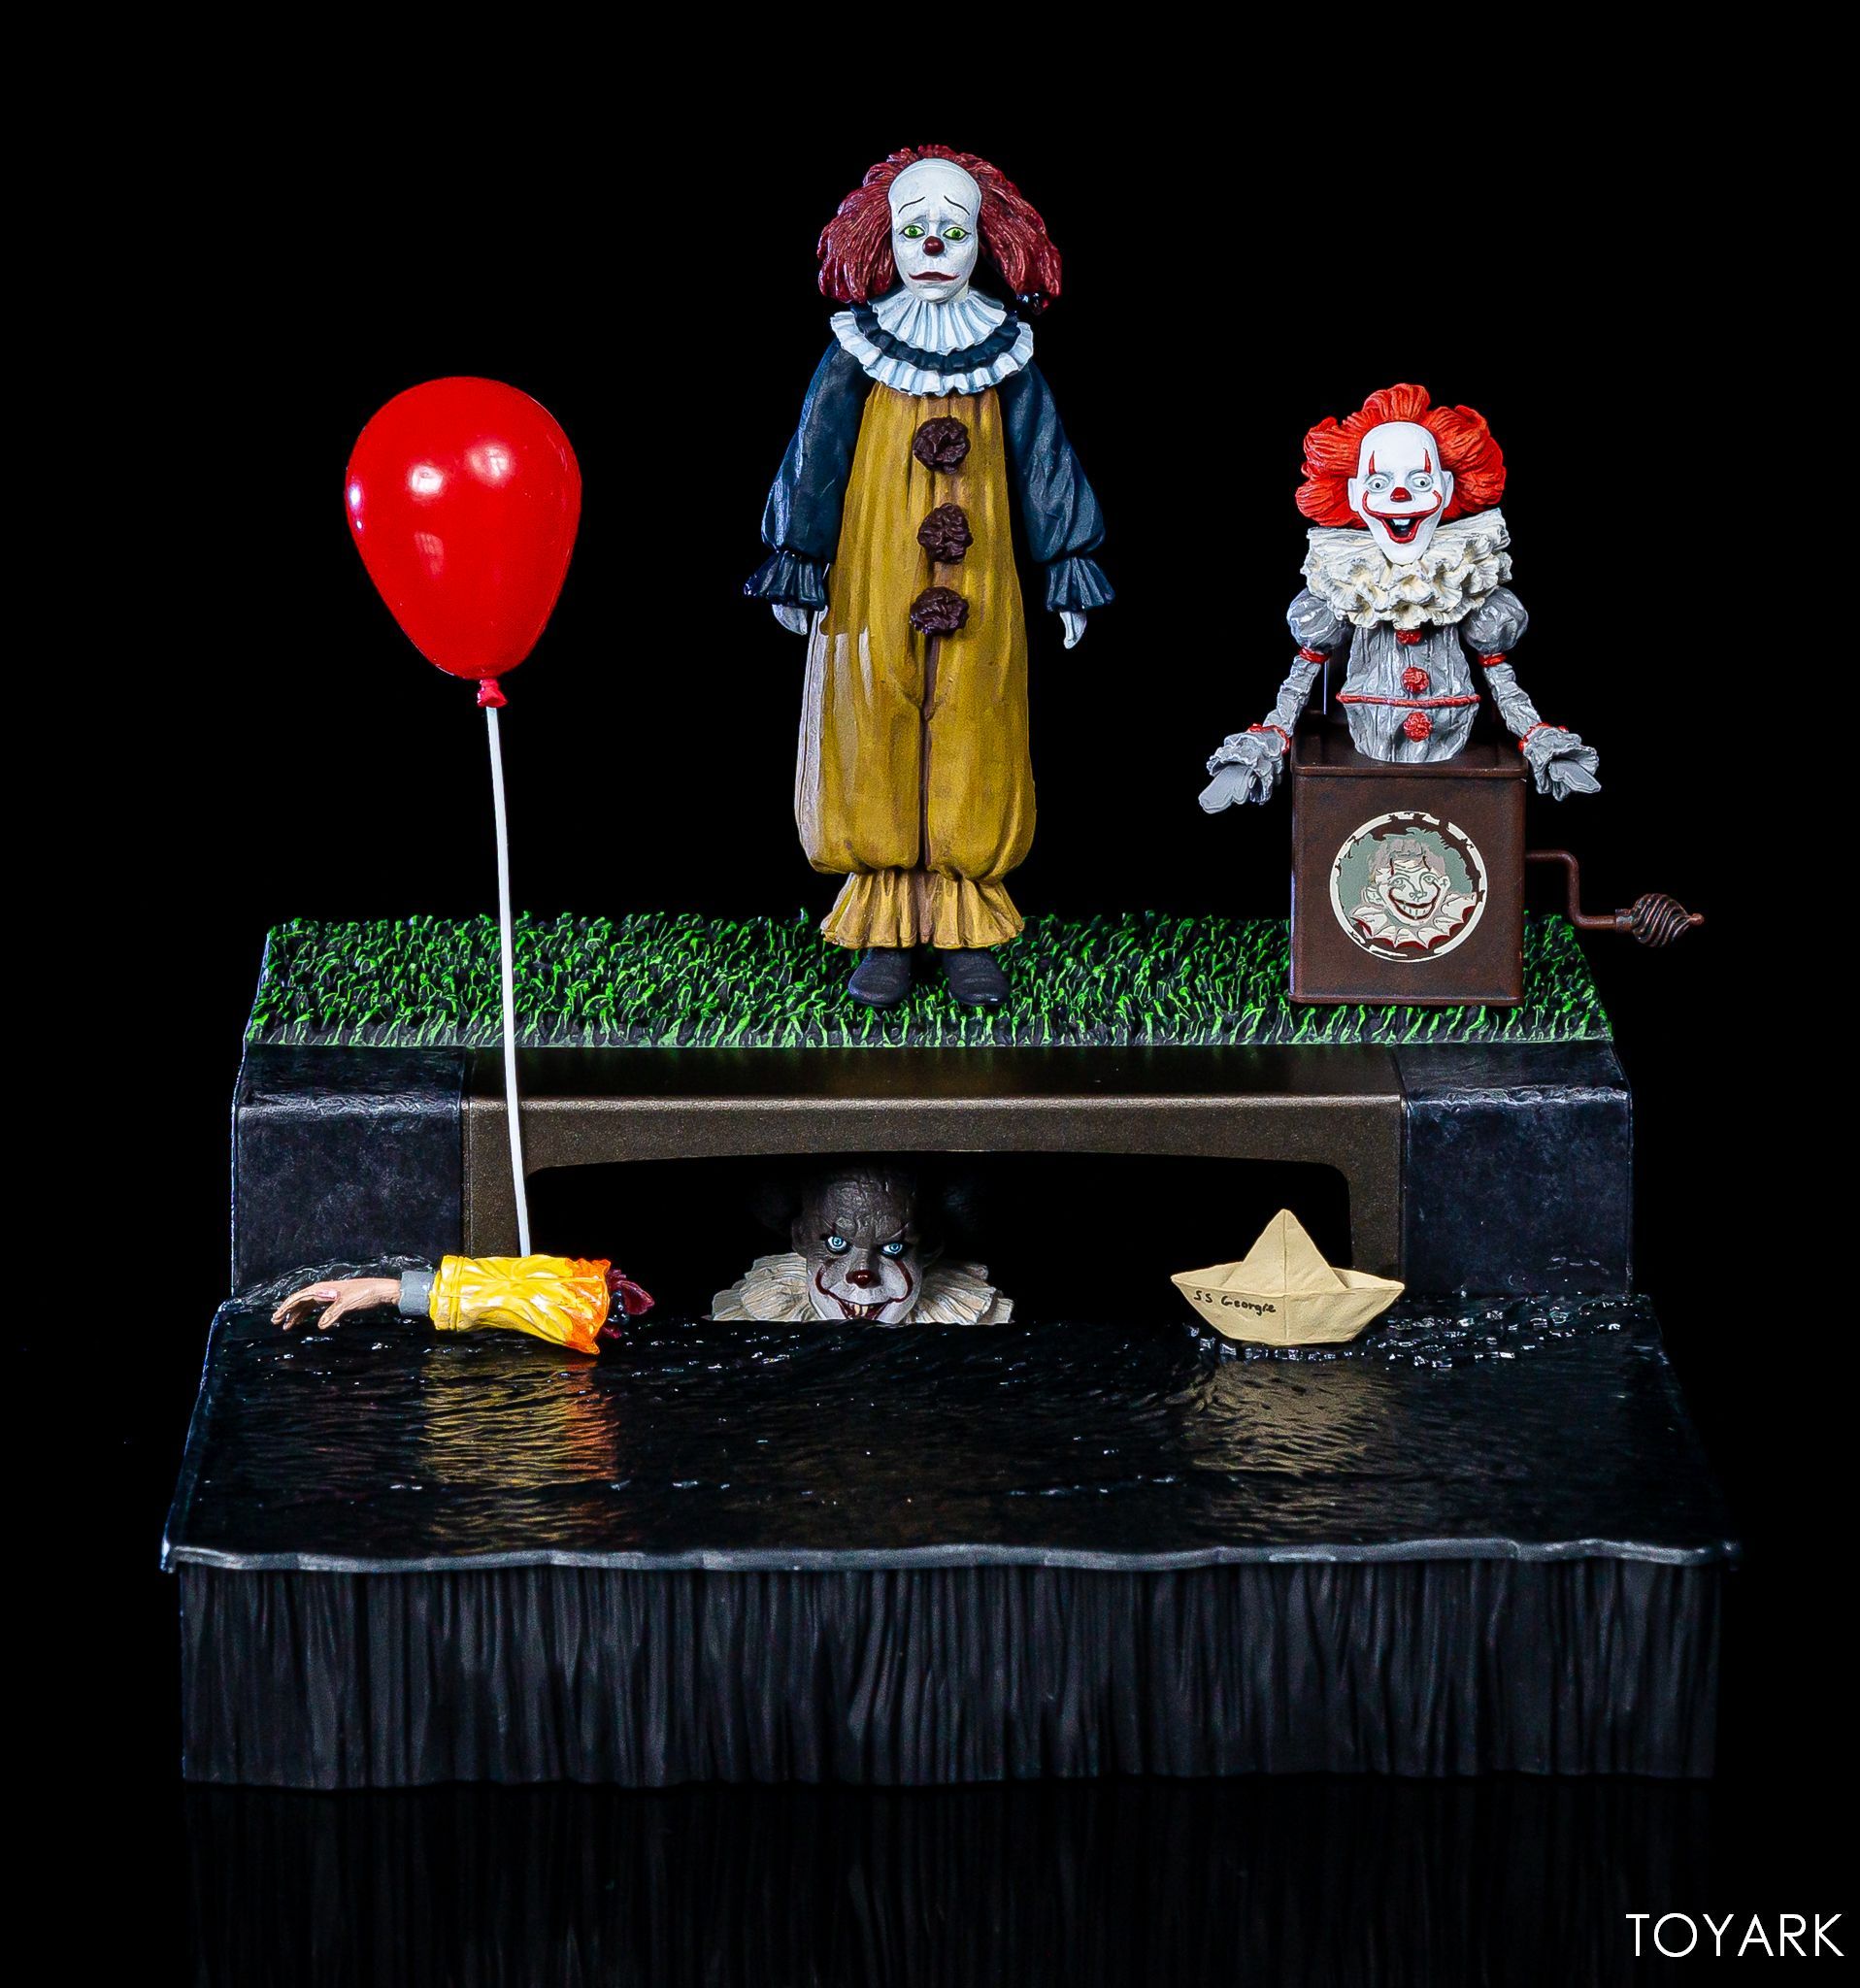 IT 2017 Clown Pennywise Figure and Pennywise Accessory Set Photo Shoot